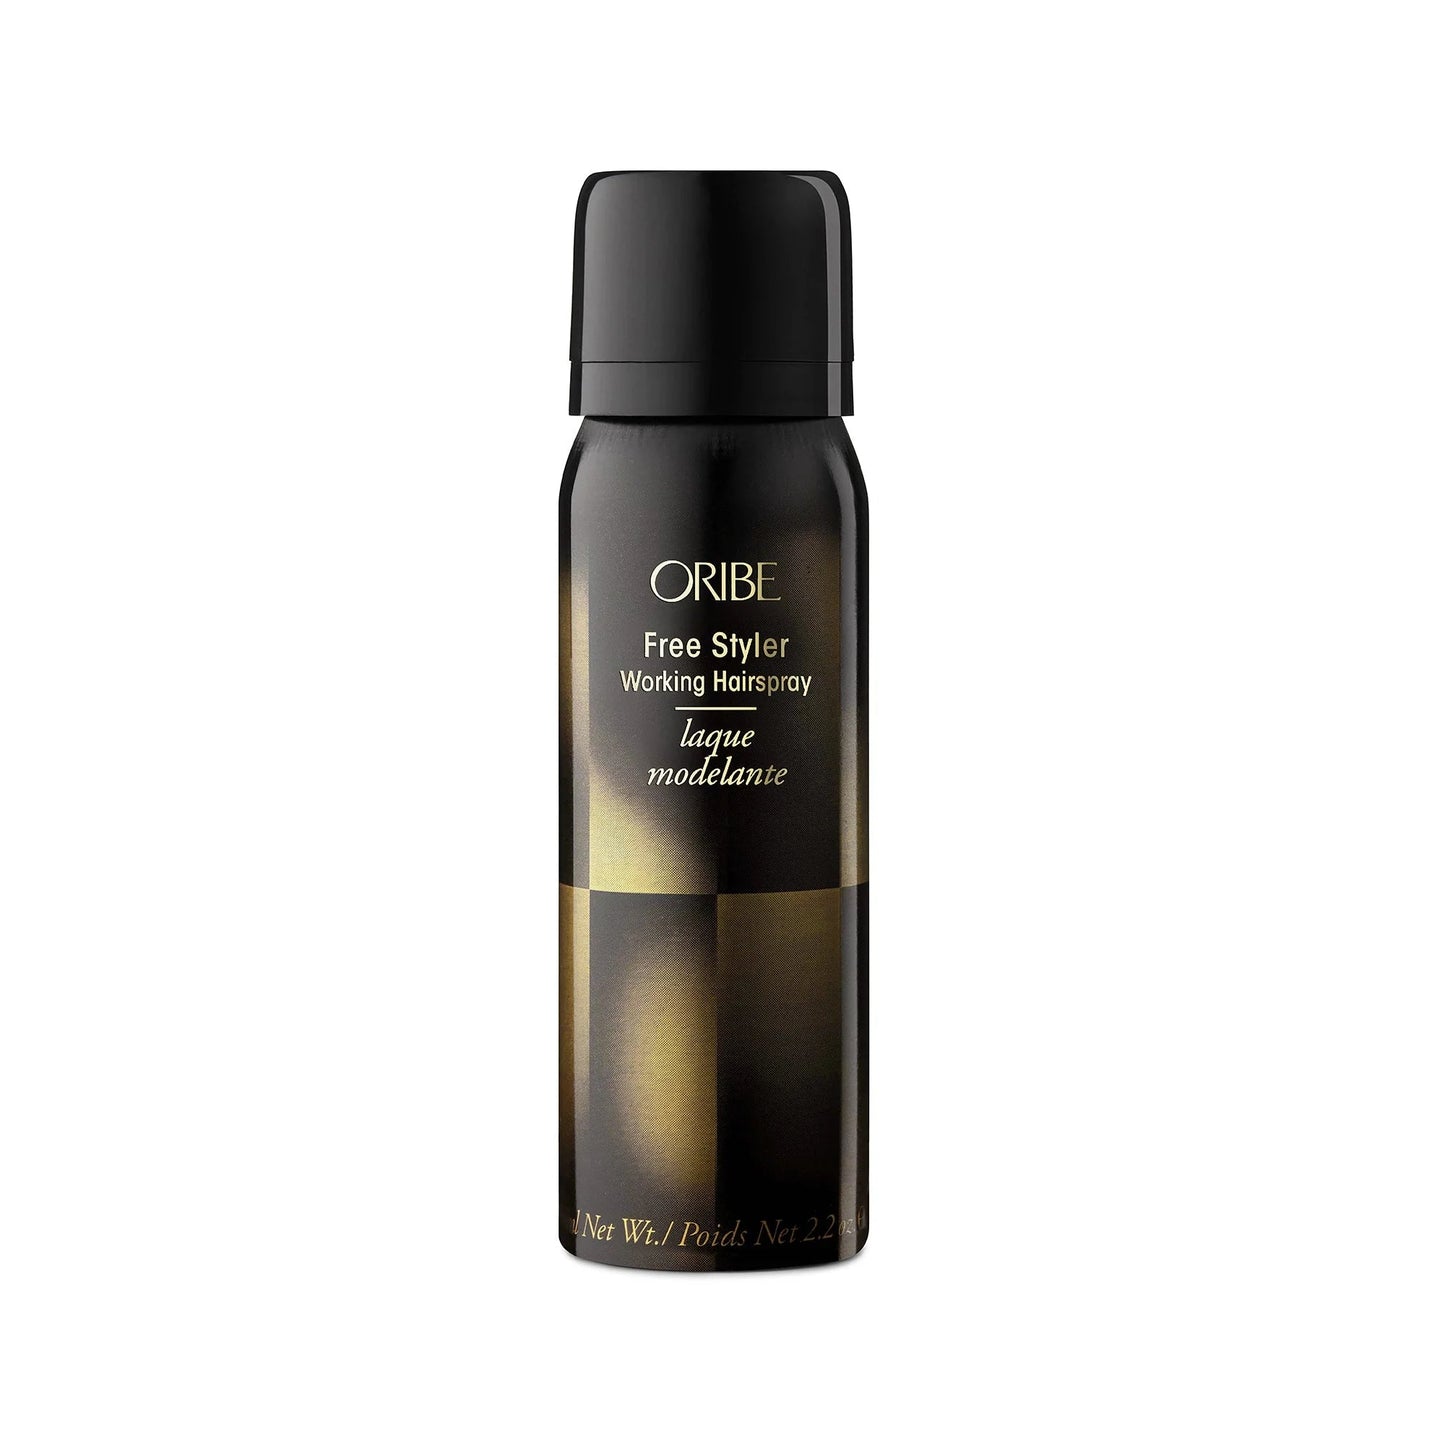 Oribe Free Styler Working Hair Spray - Travel Size - shelley and co